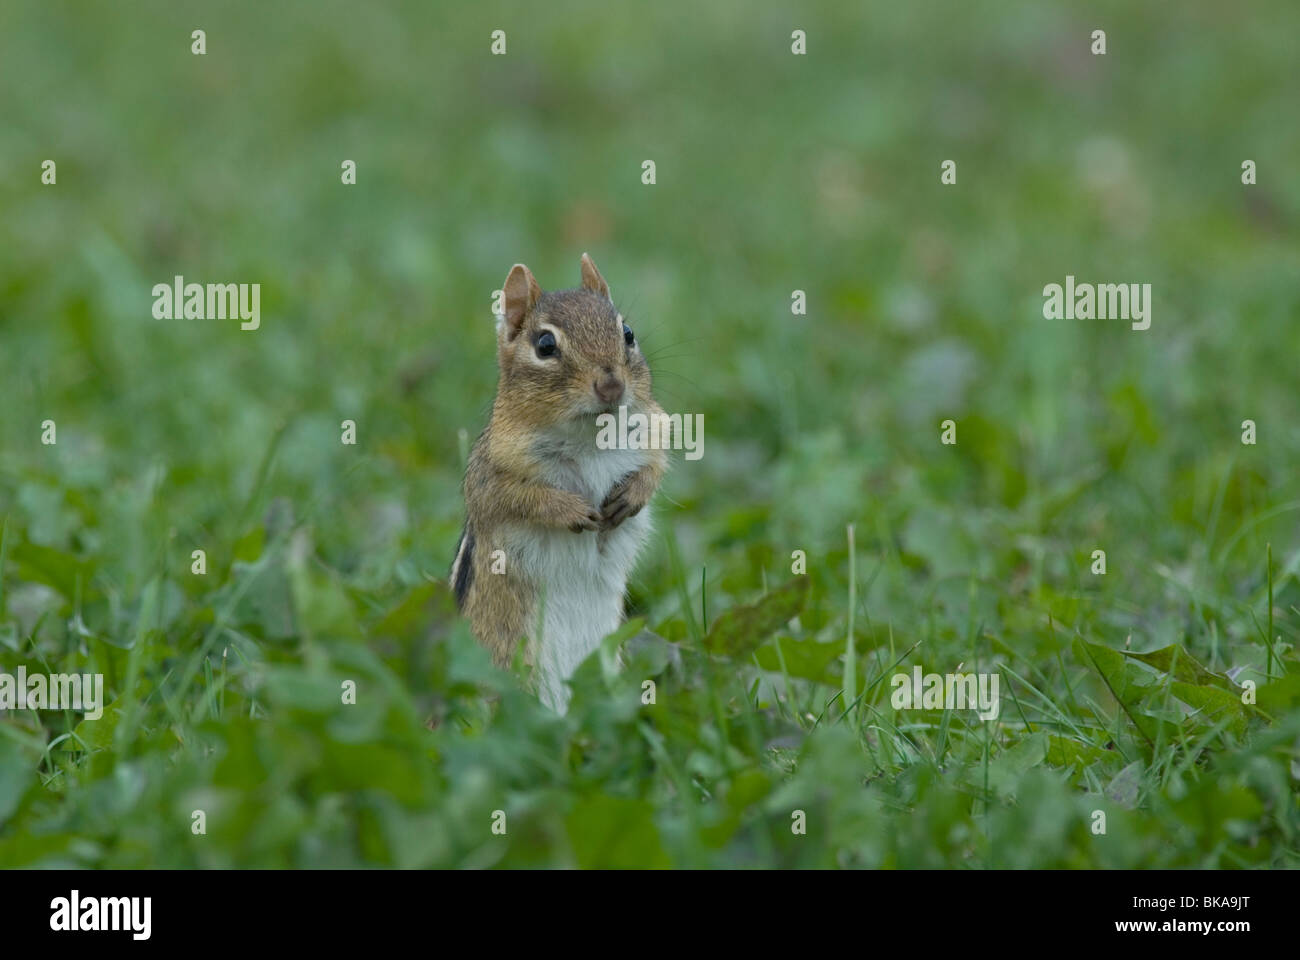 Eastern Chipmunk standing in the grass. Stock Photo